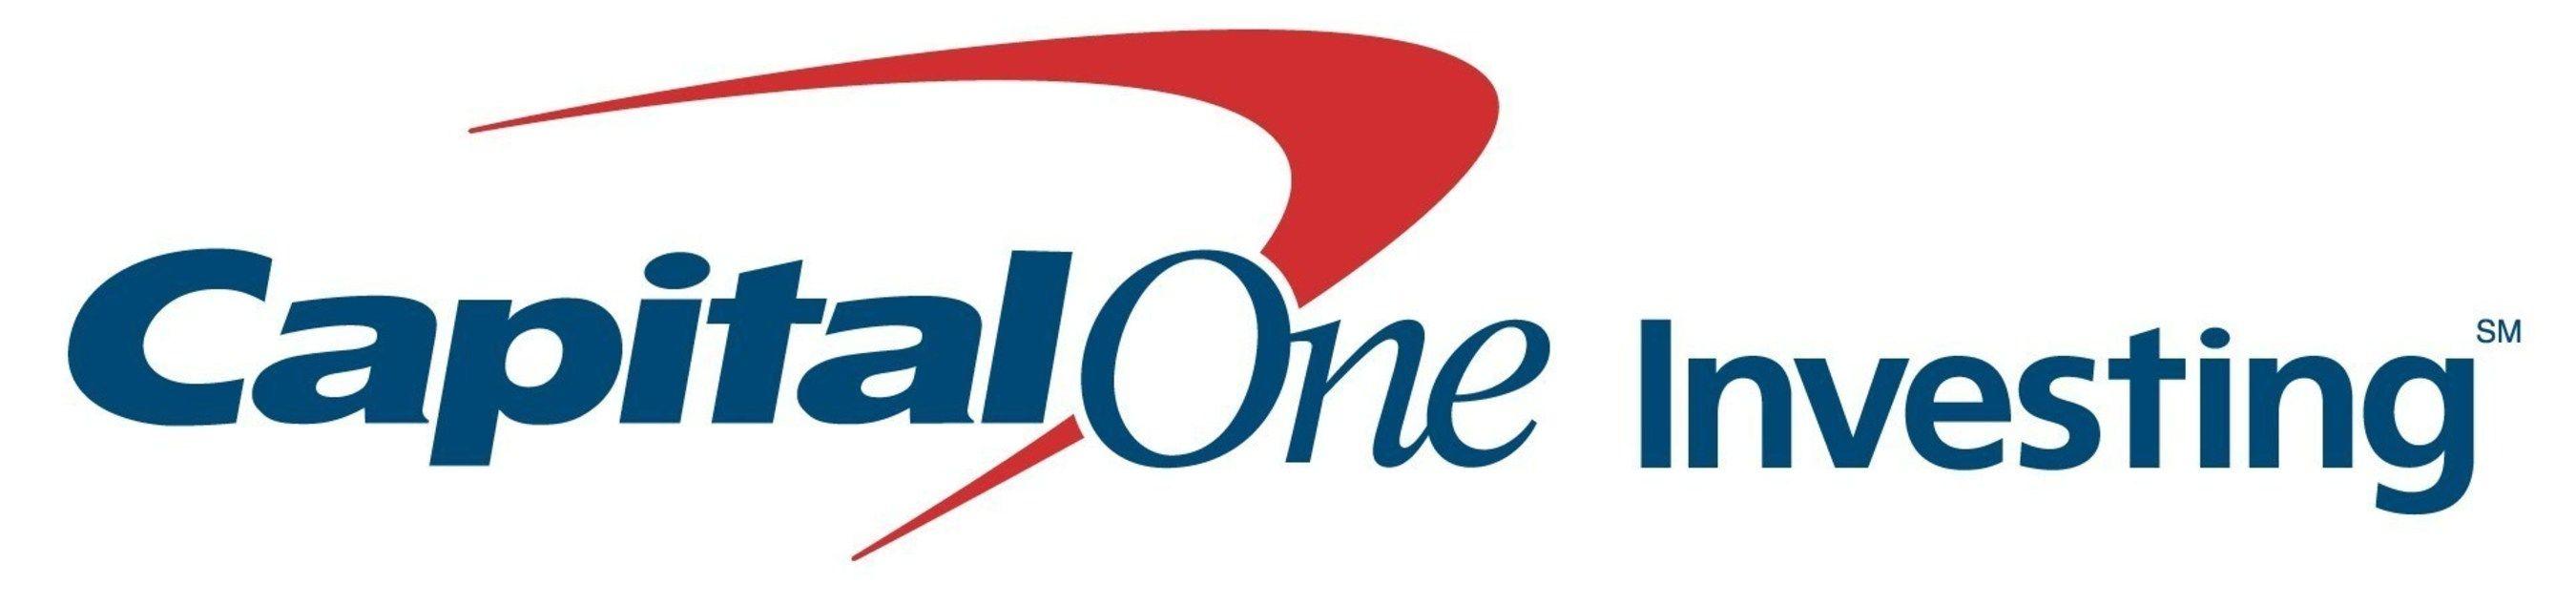 Capital One Financial Logo - Capital One Investing Advisor Connect Offers Unbiased Investment